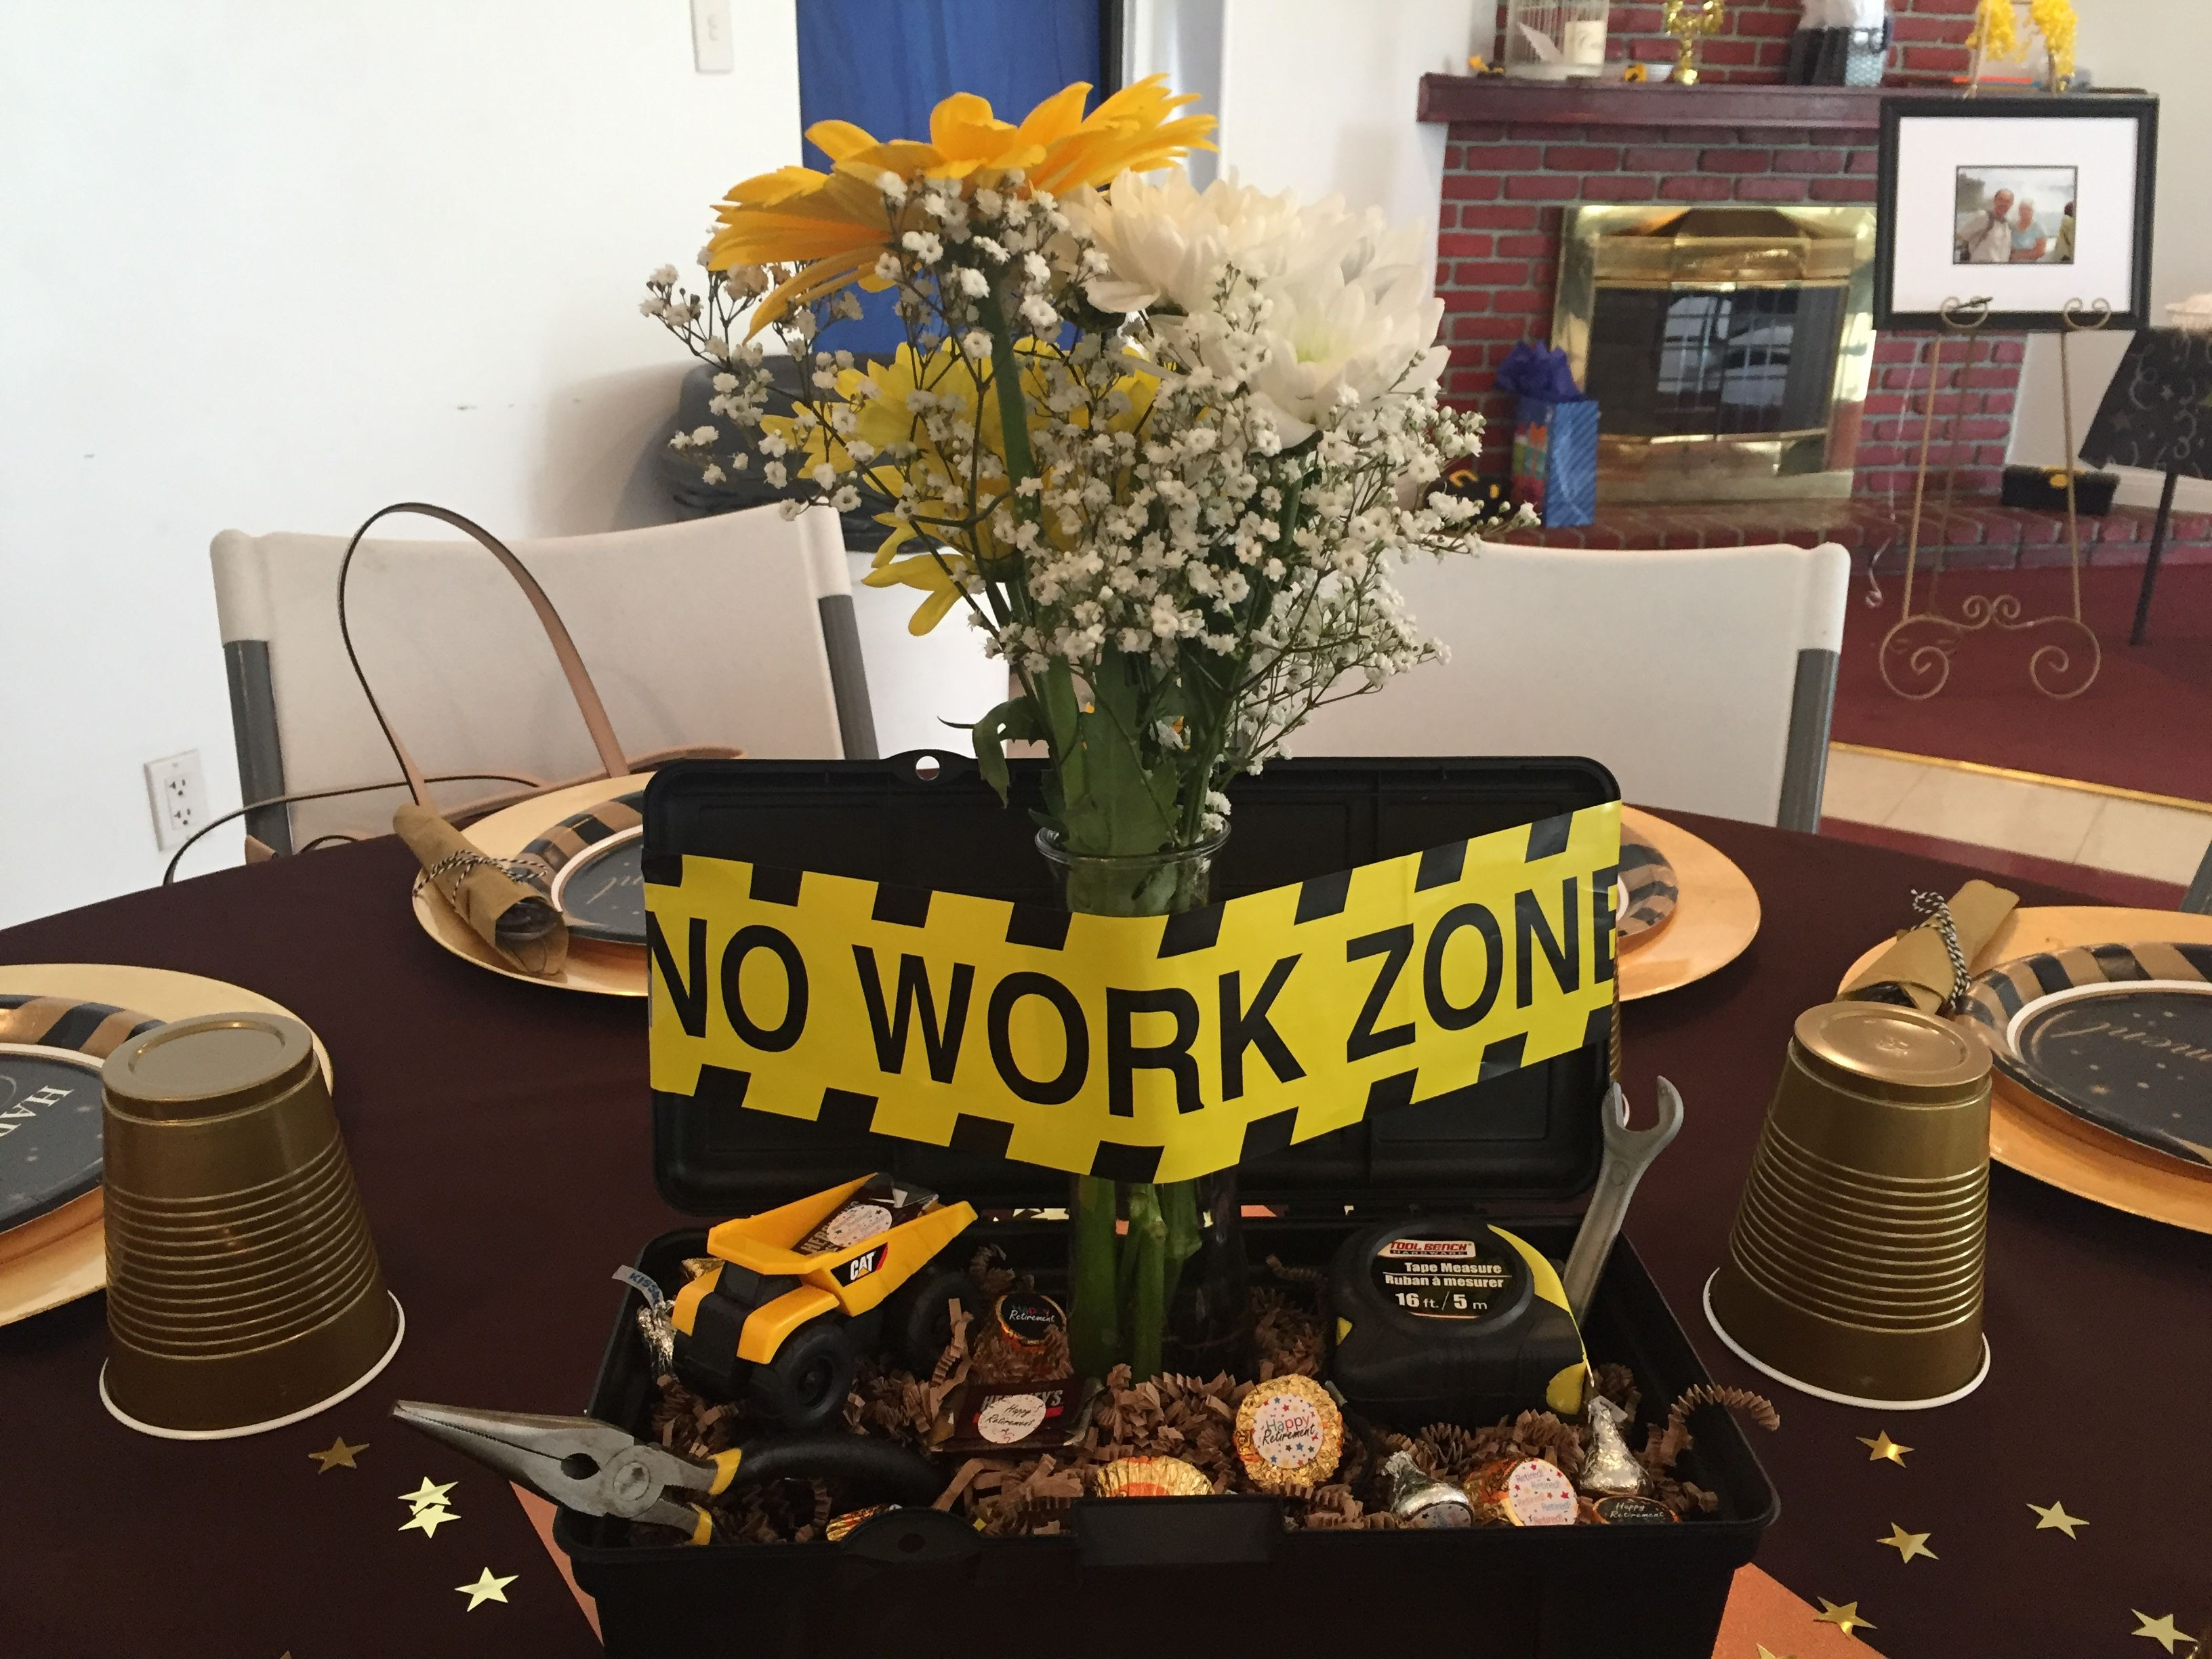 Construction Retirement Party Ideas
 I couldn t find a retirement party centerpiece for a